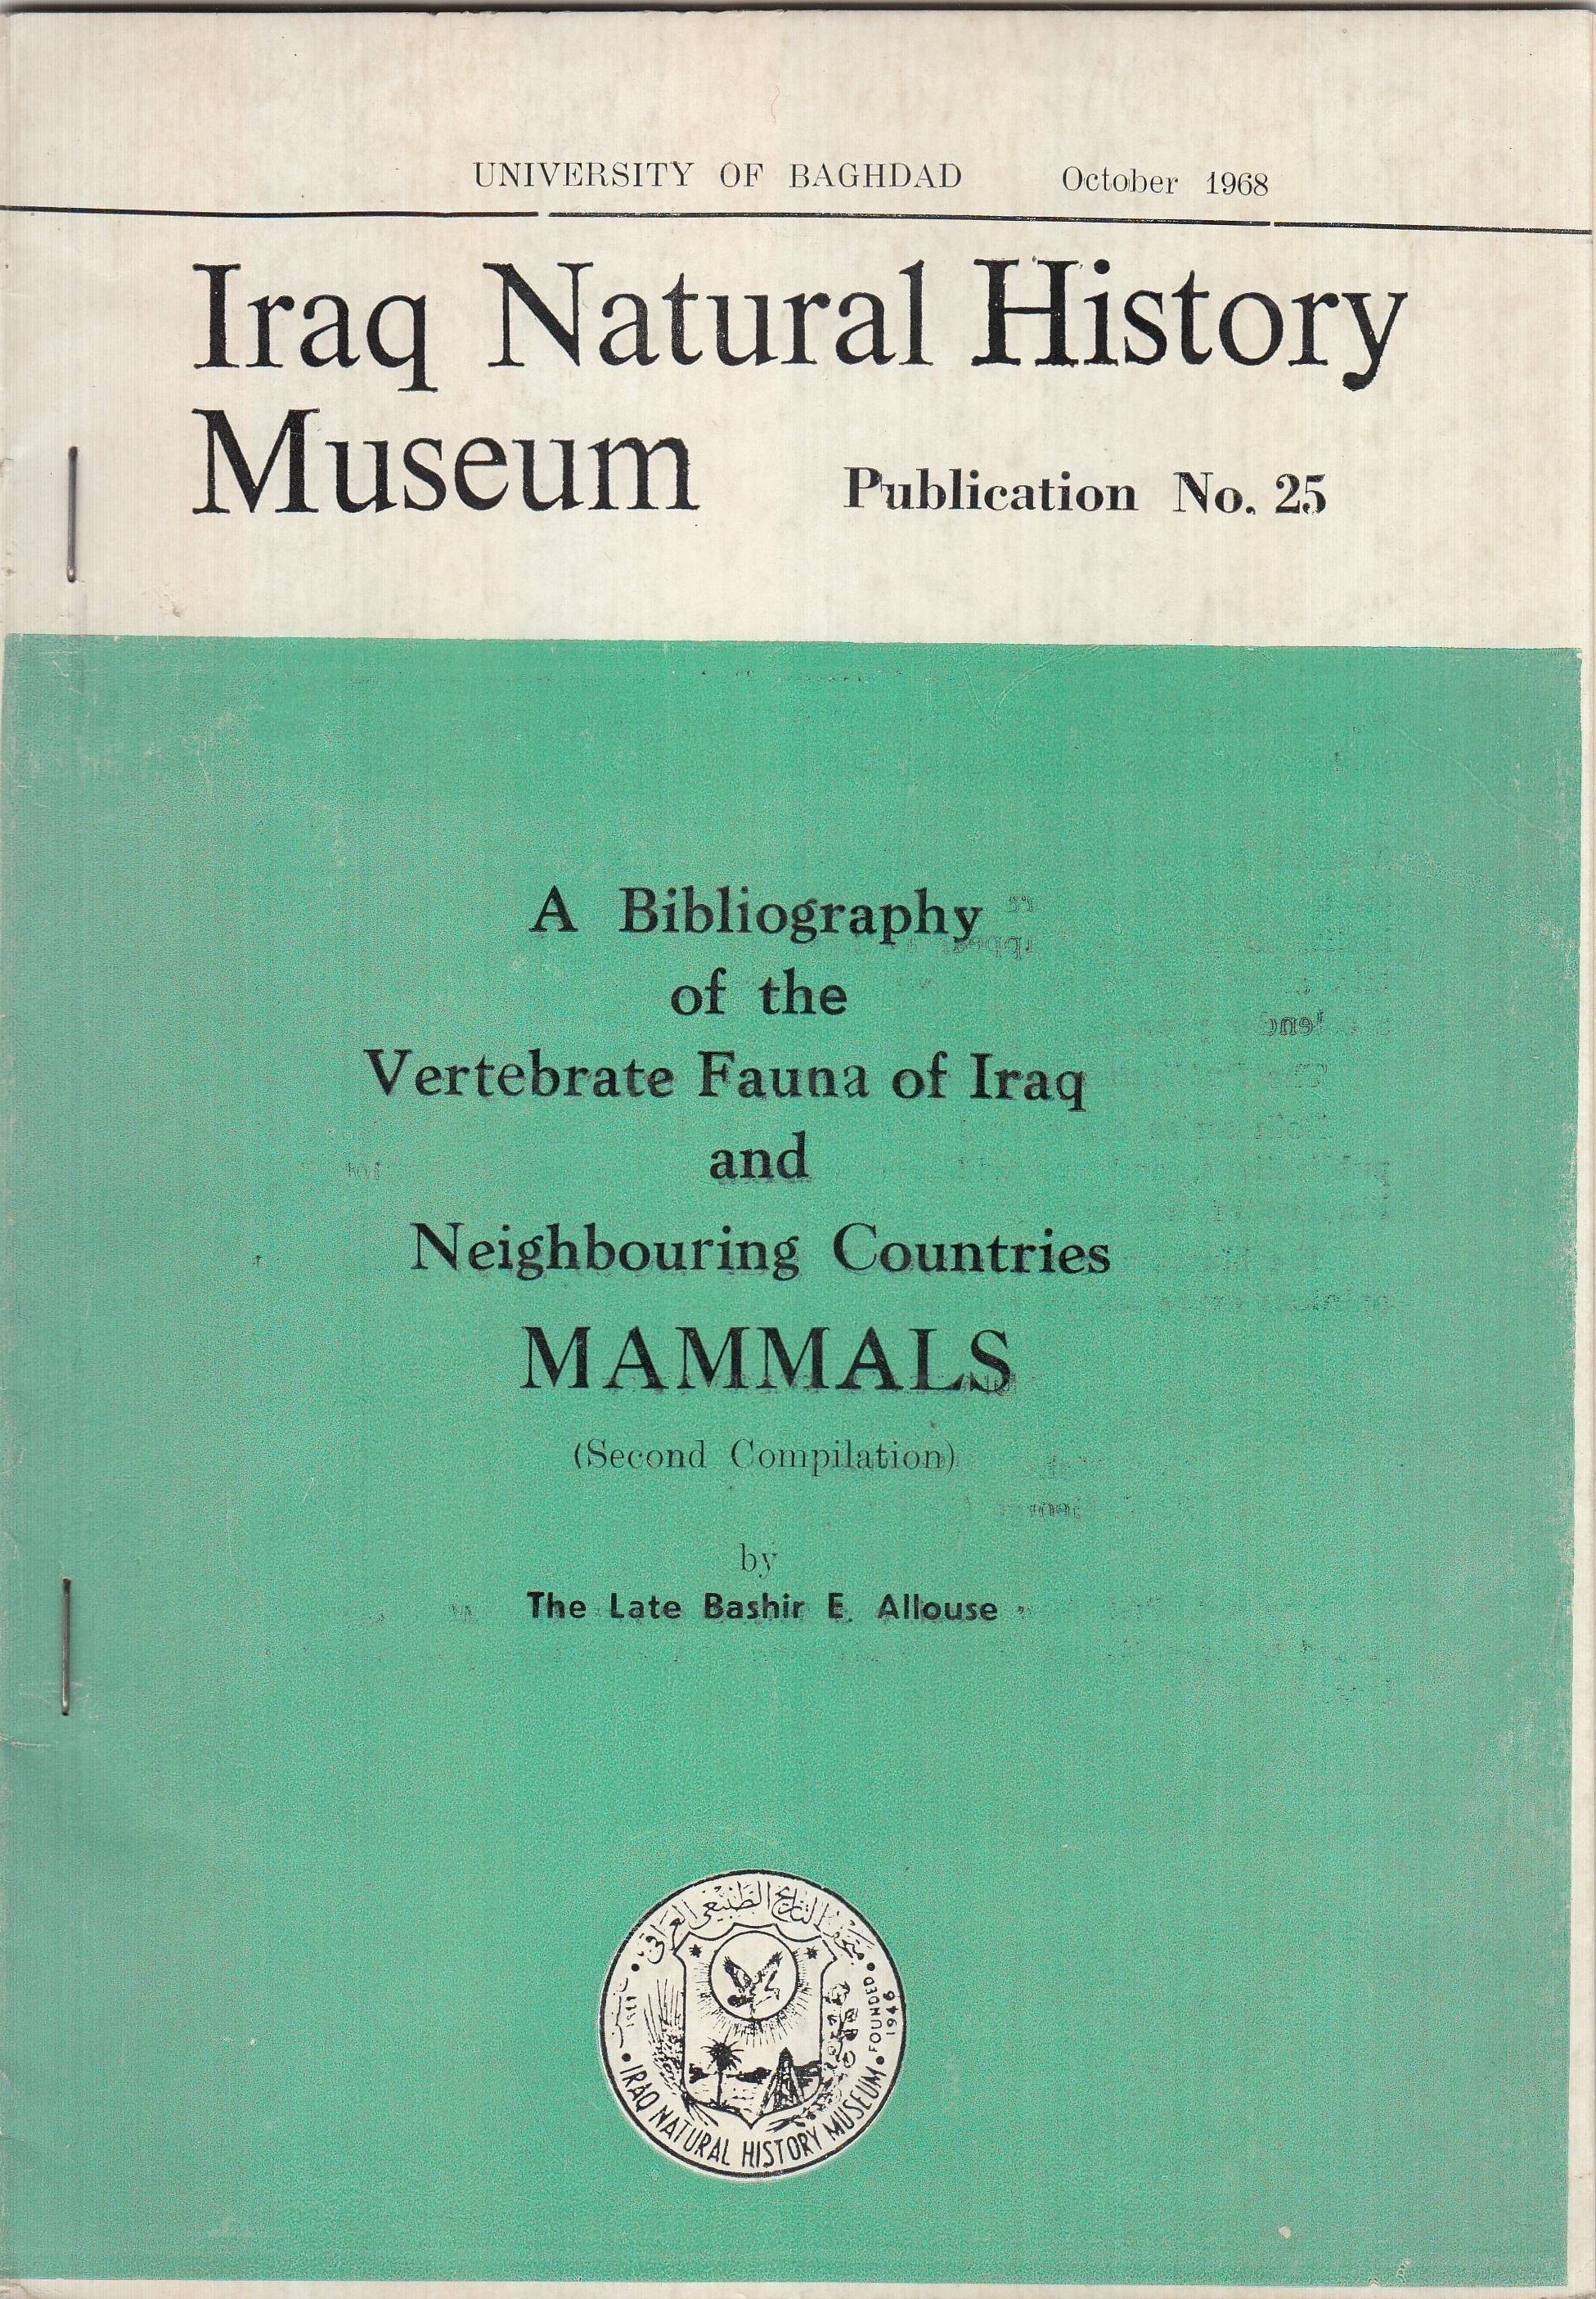 					View No. 25 (1968): A Bibliography of the Vertebrate Fauna of Iraq and Neighbouring Countries MAMMALS (Second Compilation) by The Late Bashir E. Allouse , Iraq Nat.Hist. Mus, Baghdad, Iraq
				